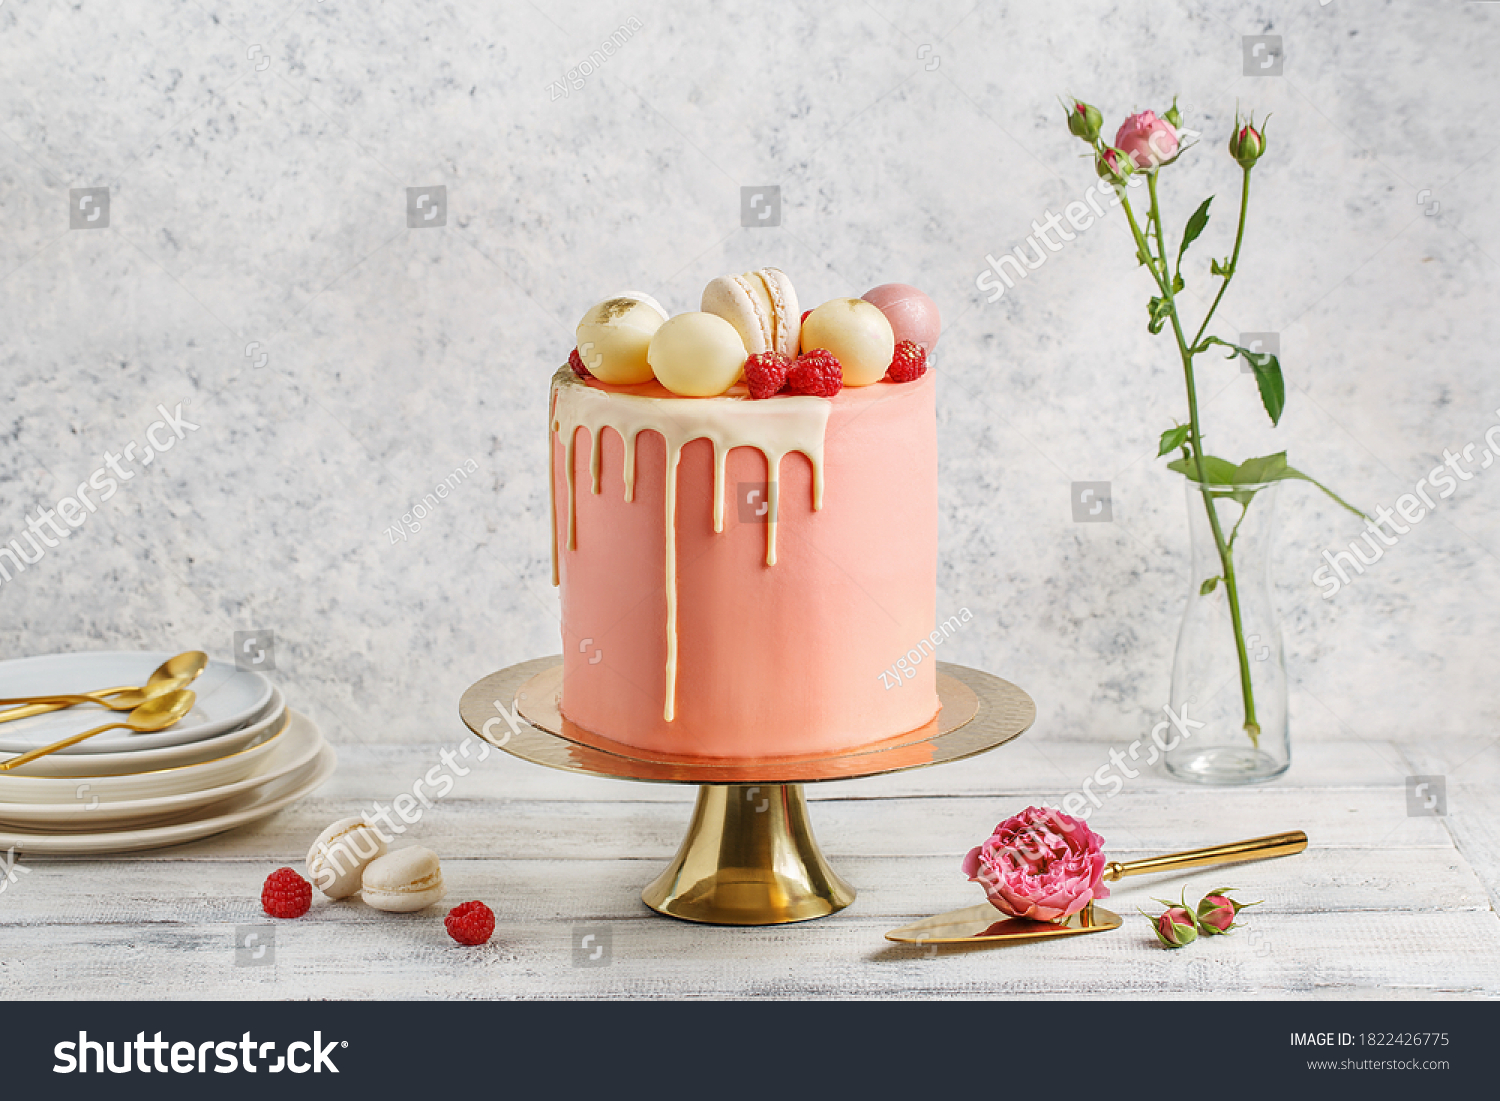 Tall pink cake decorated with macaroons, raspberries and chocolate balls on golden cake stand over white background with flowers and berries. Side view, copy space #1822426775